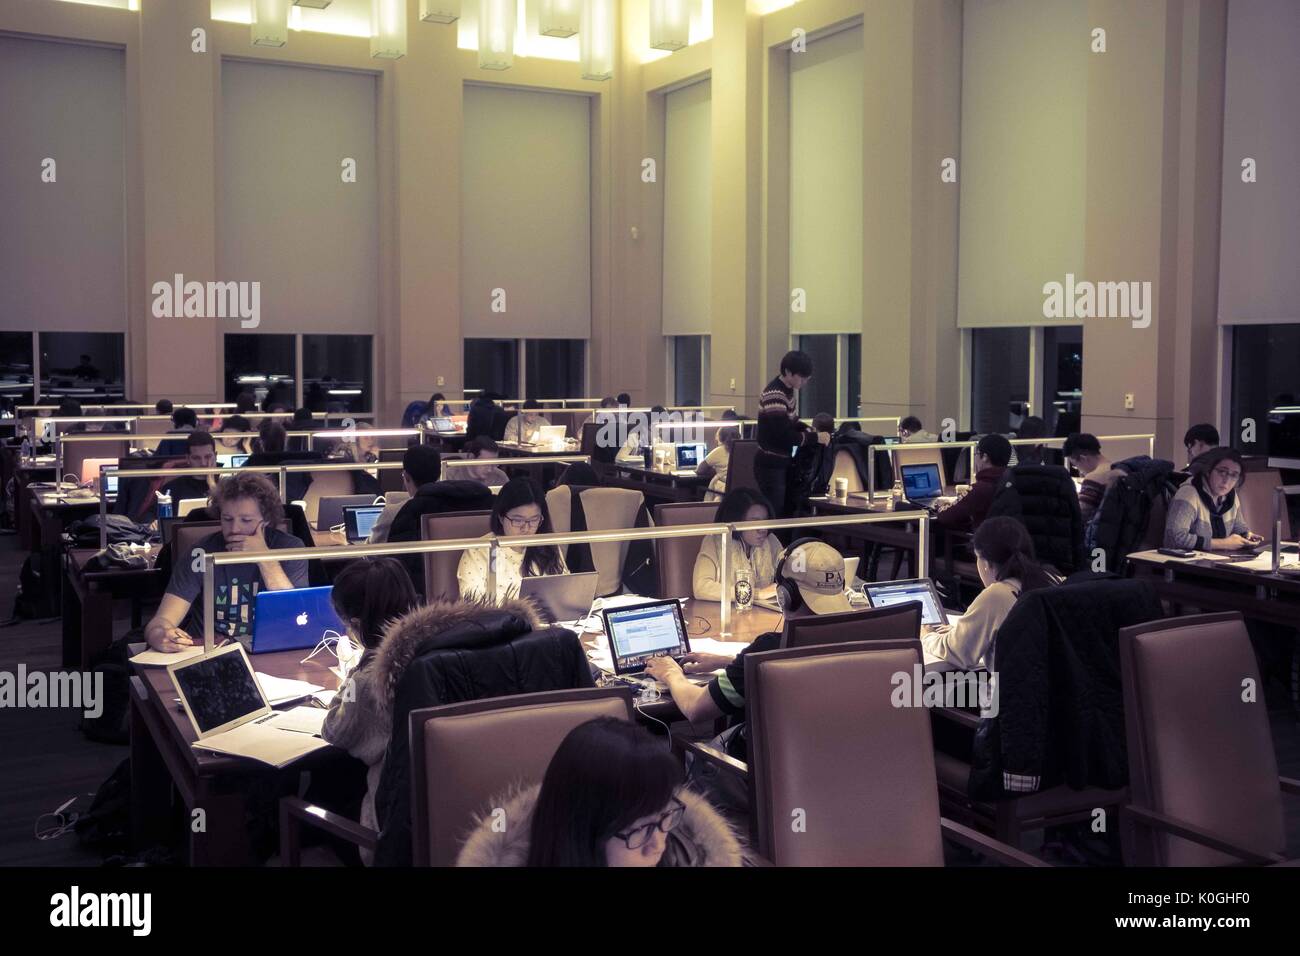 College students study at night in the reading room of the Brody Learning Commons, a study space and library on the Homewood campus of the Johns Hopkins University in Baltimore, Maryland, 2015. Courtesy Eric Chen. Stock Photo